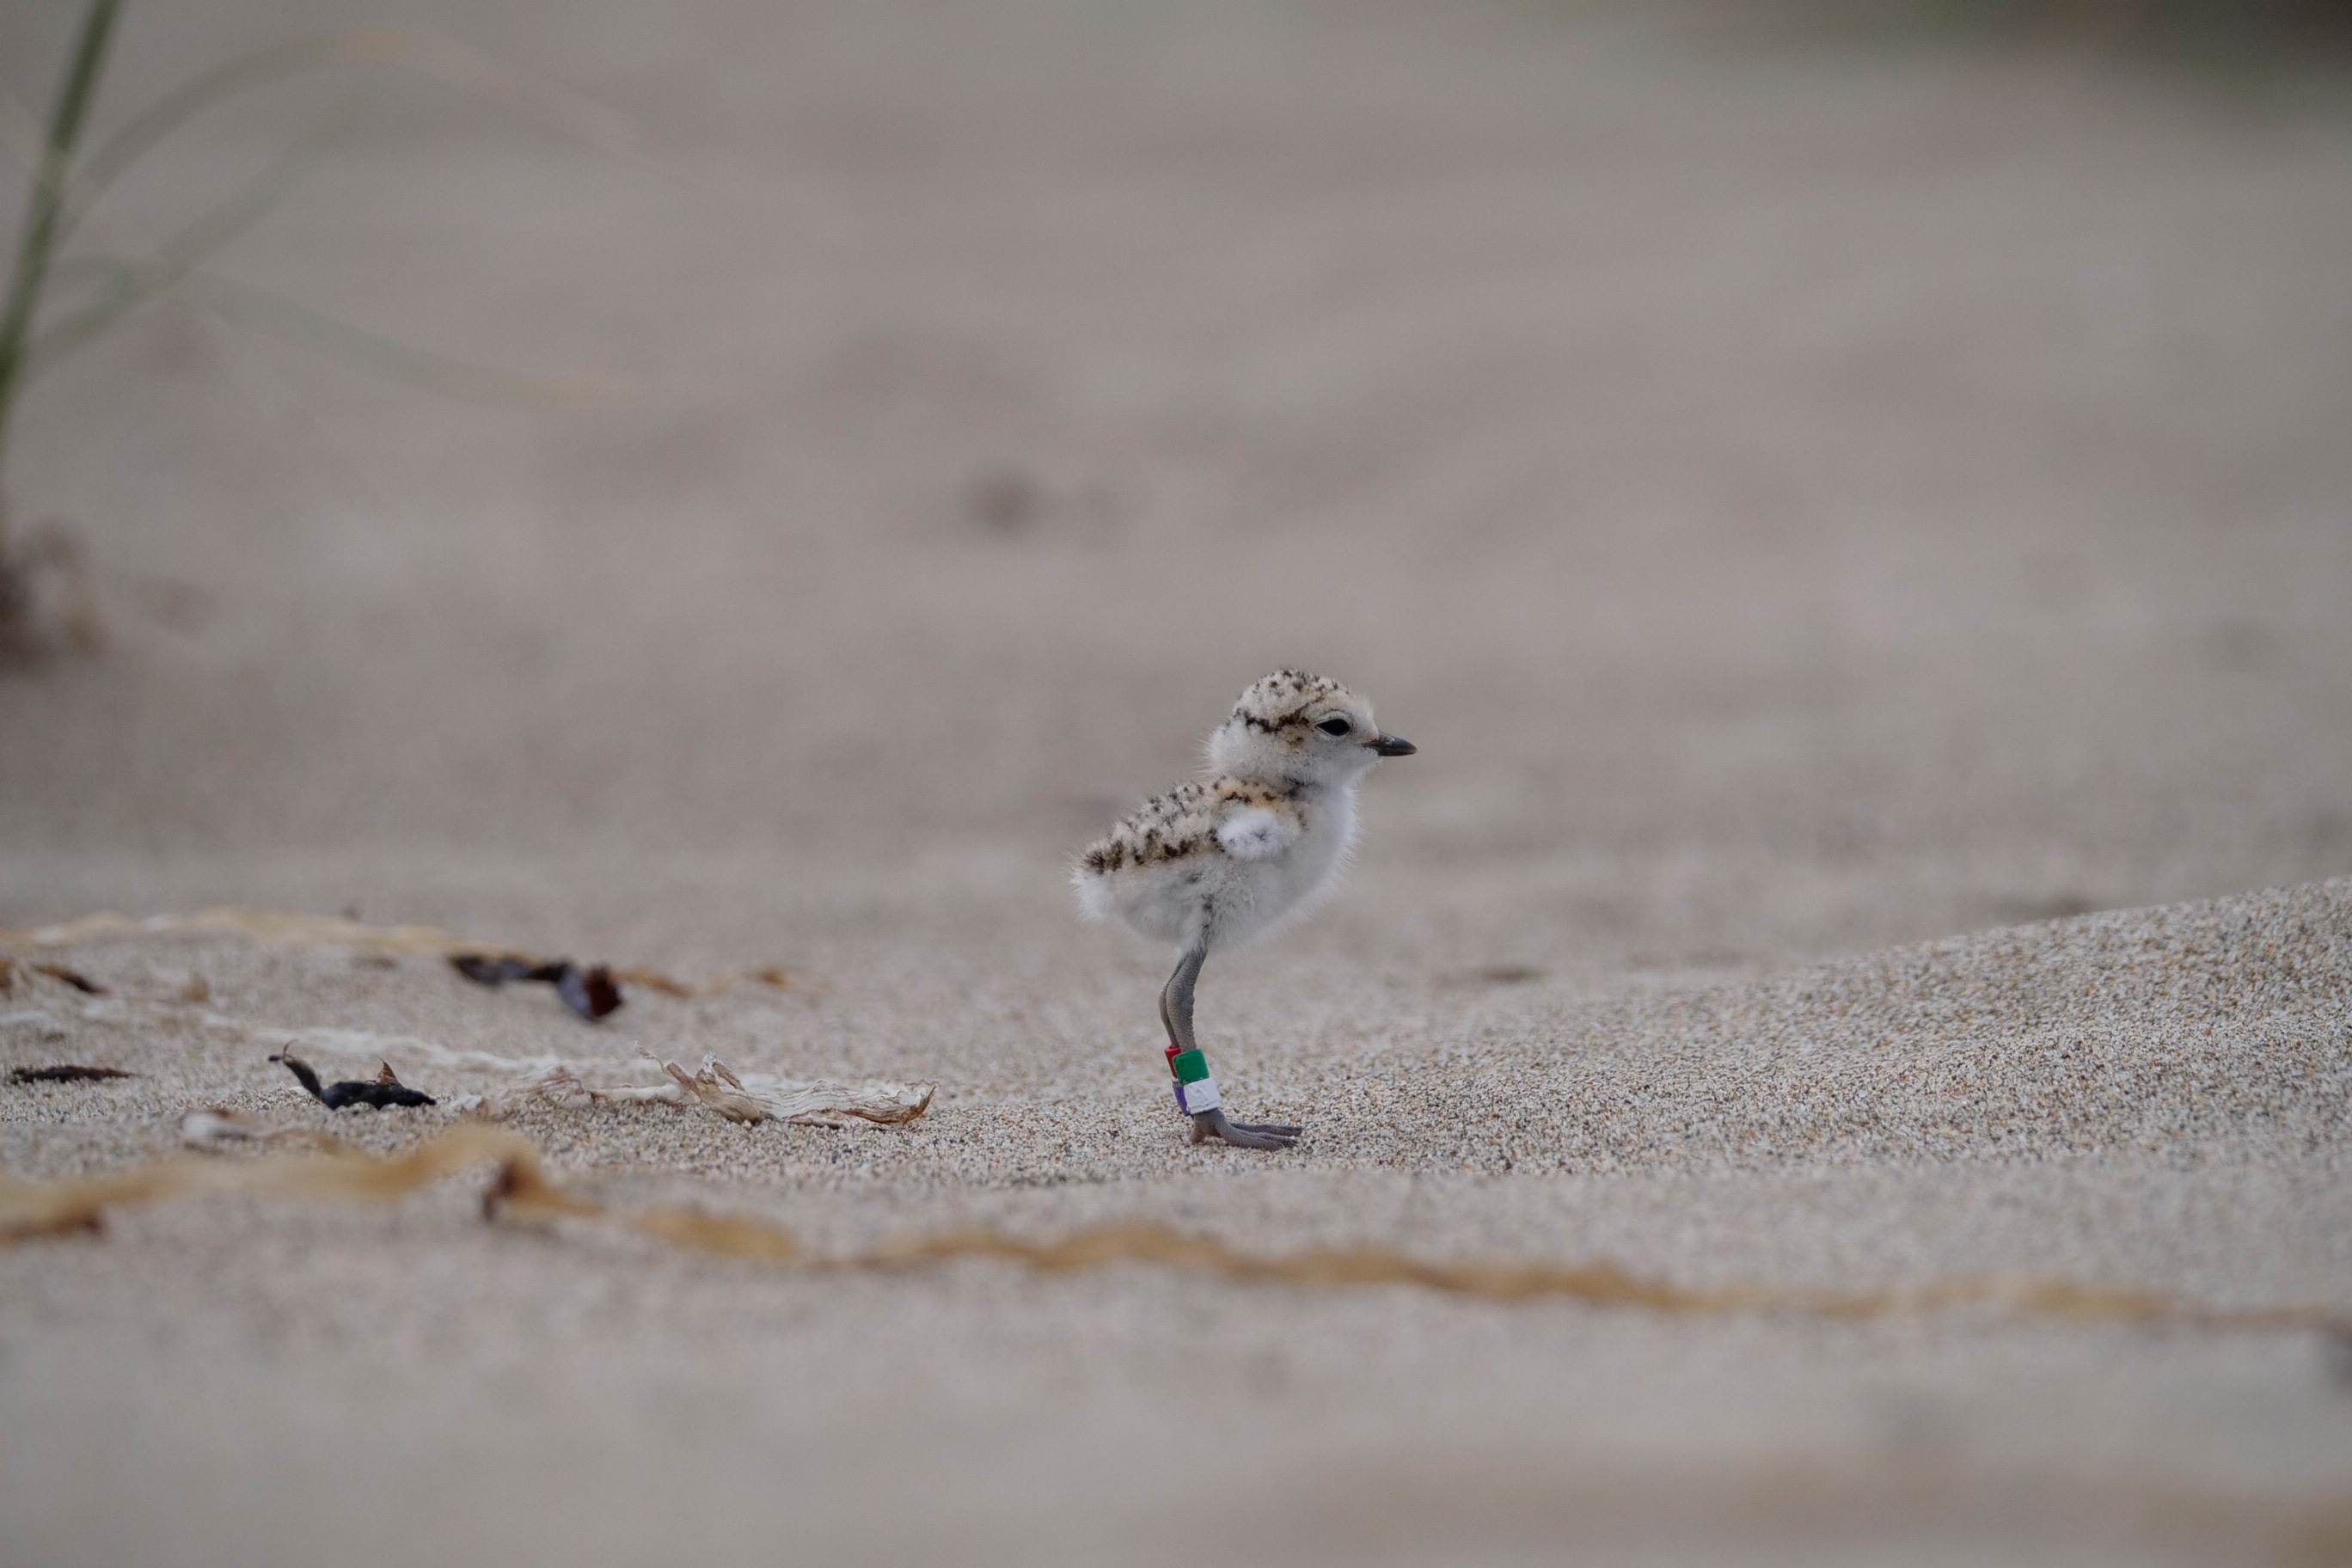 A photo of a black-speckled, beige-colored shorebird chick with colored bands around its legs standing on a sandy beach.